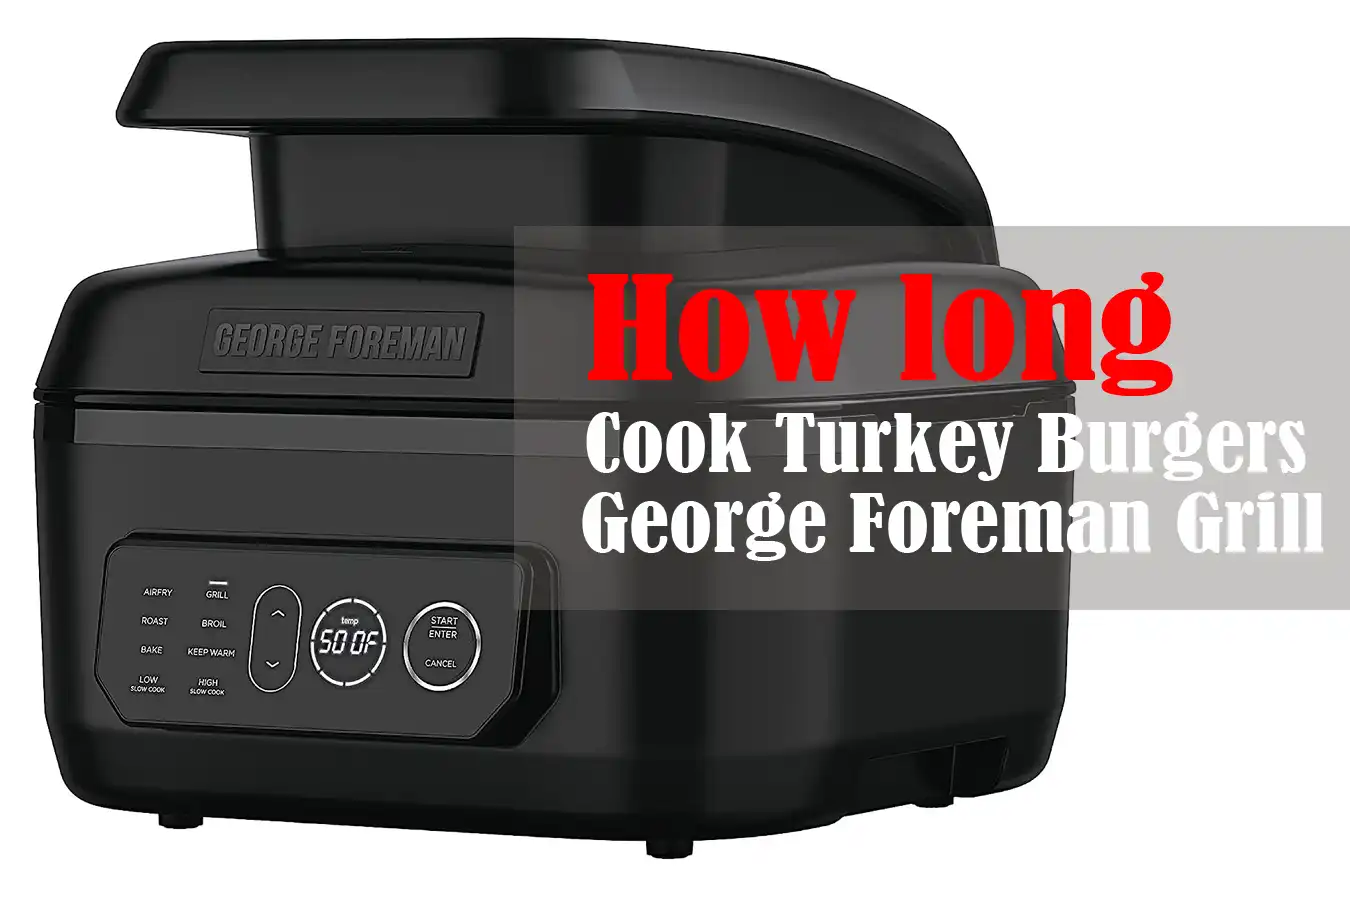 How Long to Cook Turkey Burgers on George Foreman Grill